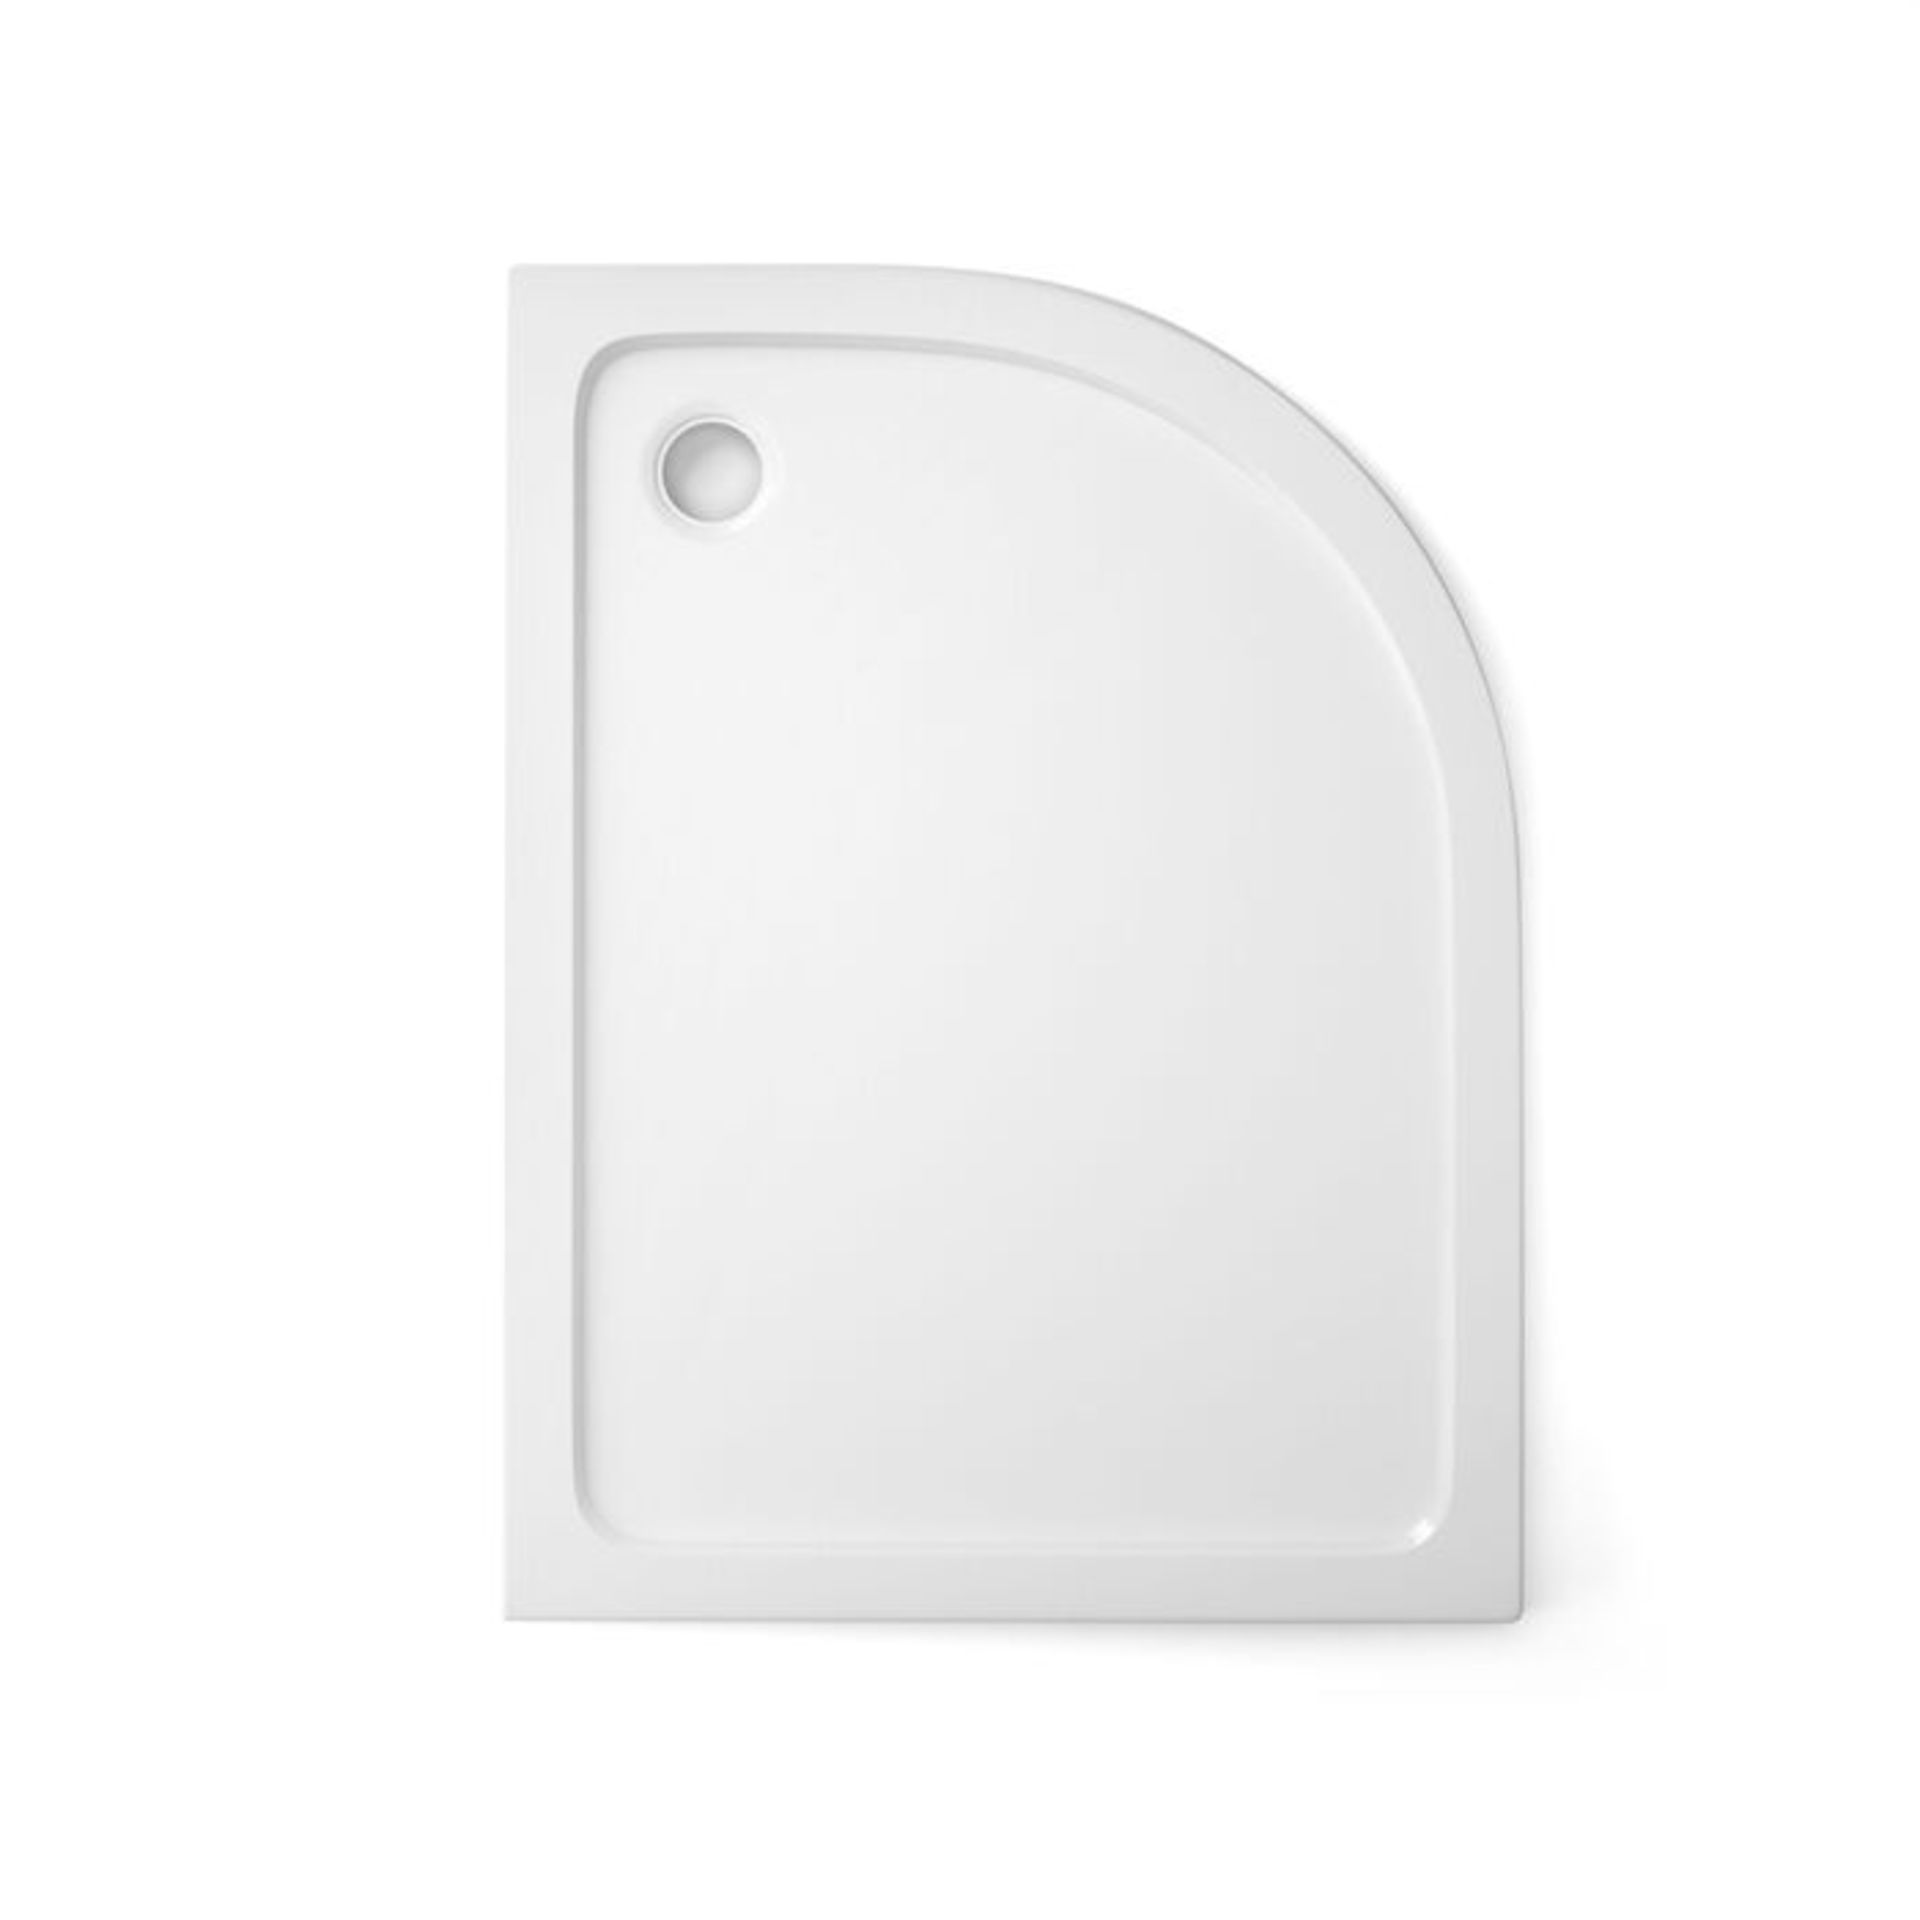 (AD137) 1200x900mm Offset Quadrant Ultra Slim Stone Shower Tray - Right. Low profile ultra slim - Image 2 of 2